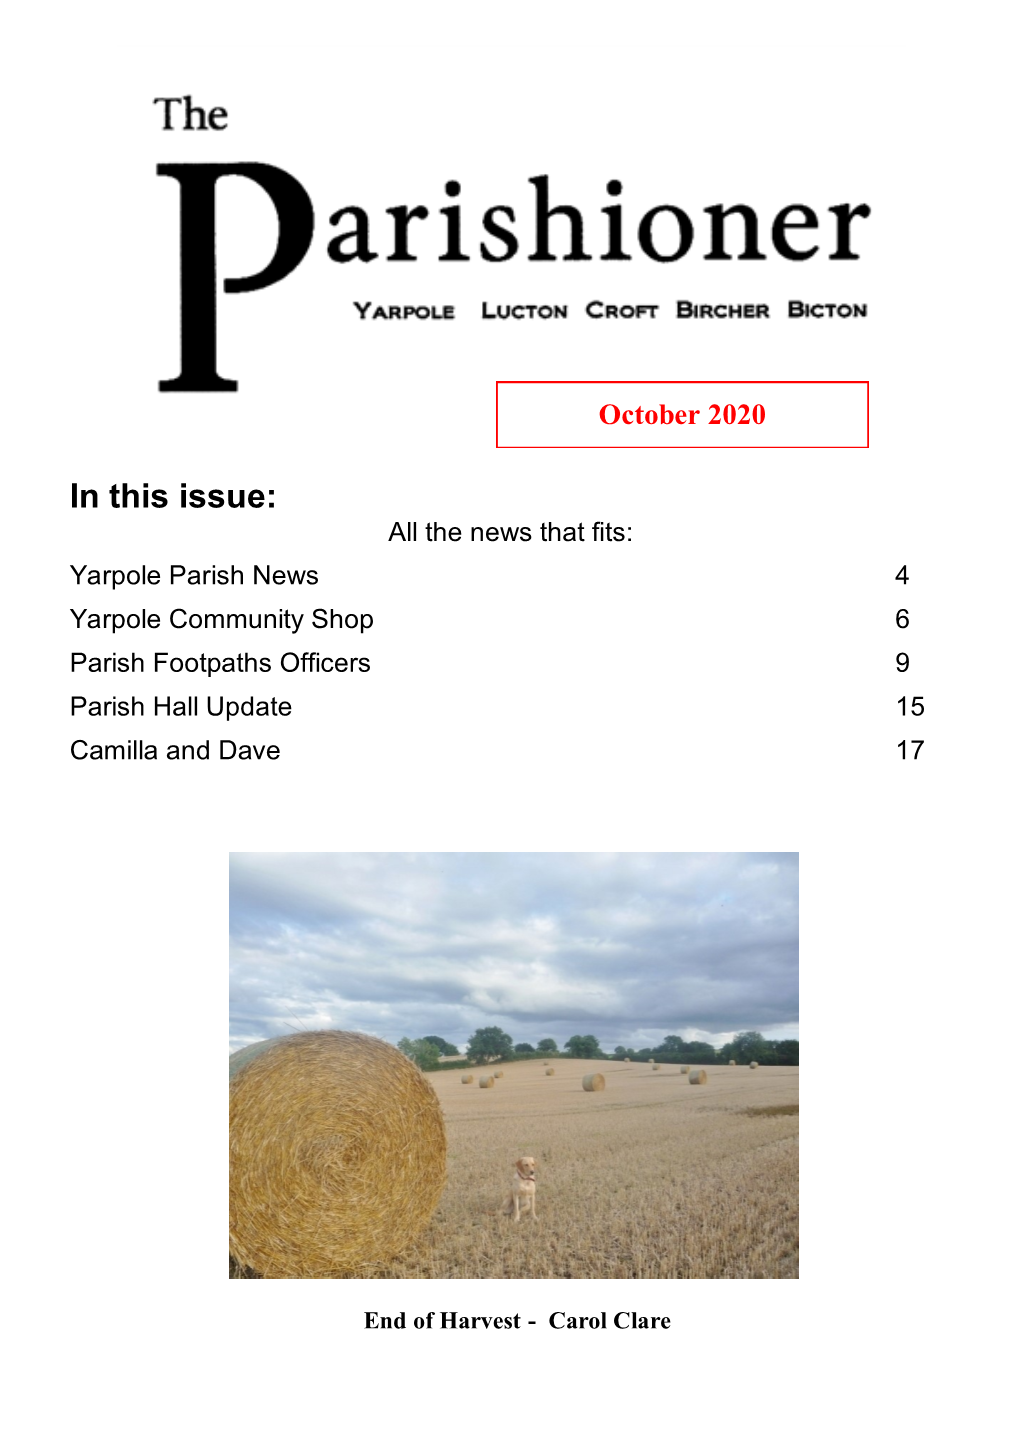 In This Issue: All the News That Fits: Yarpole Parish News 4 Yarpole Community Shop 6 Parish Footpaths Officers 9 Parish Hall Update 15 Camilla and Dave 17